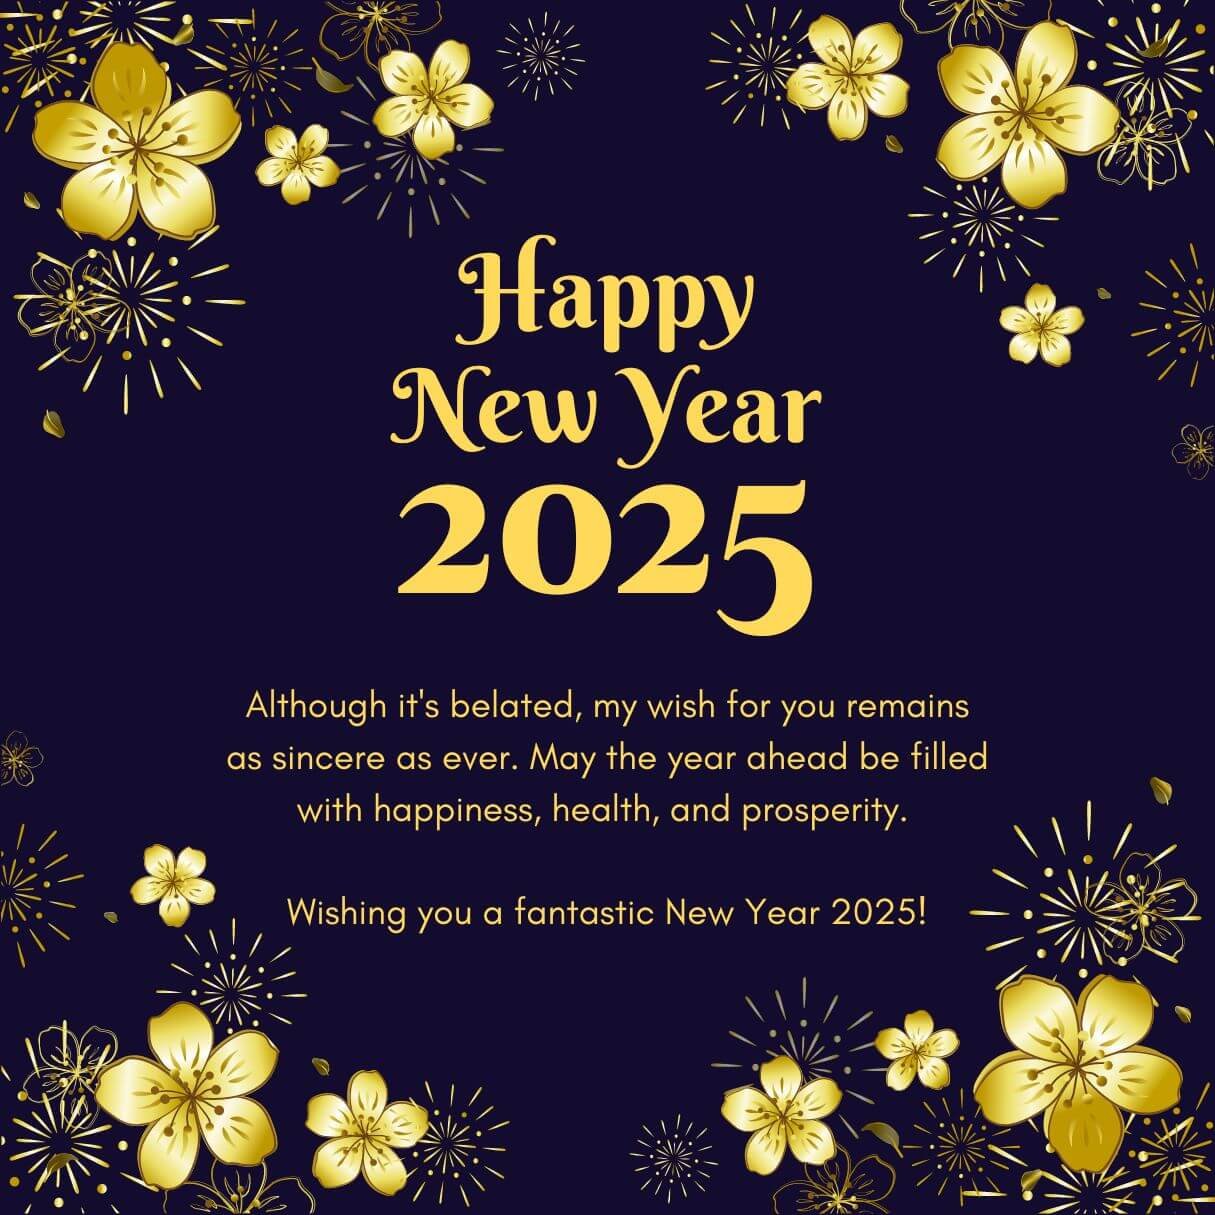 You are currently viewing 80 Belated Happy New Year 2025 Wishes (with Images)